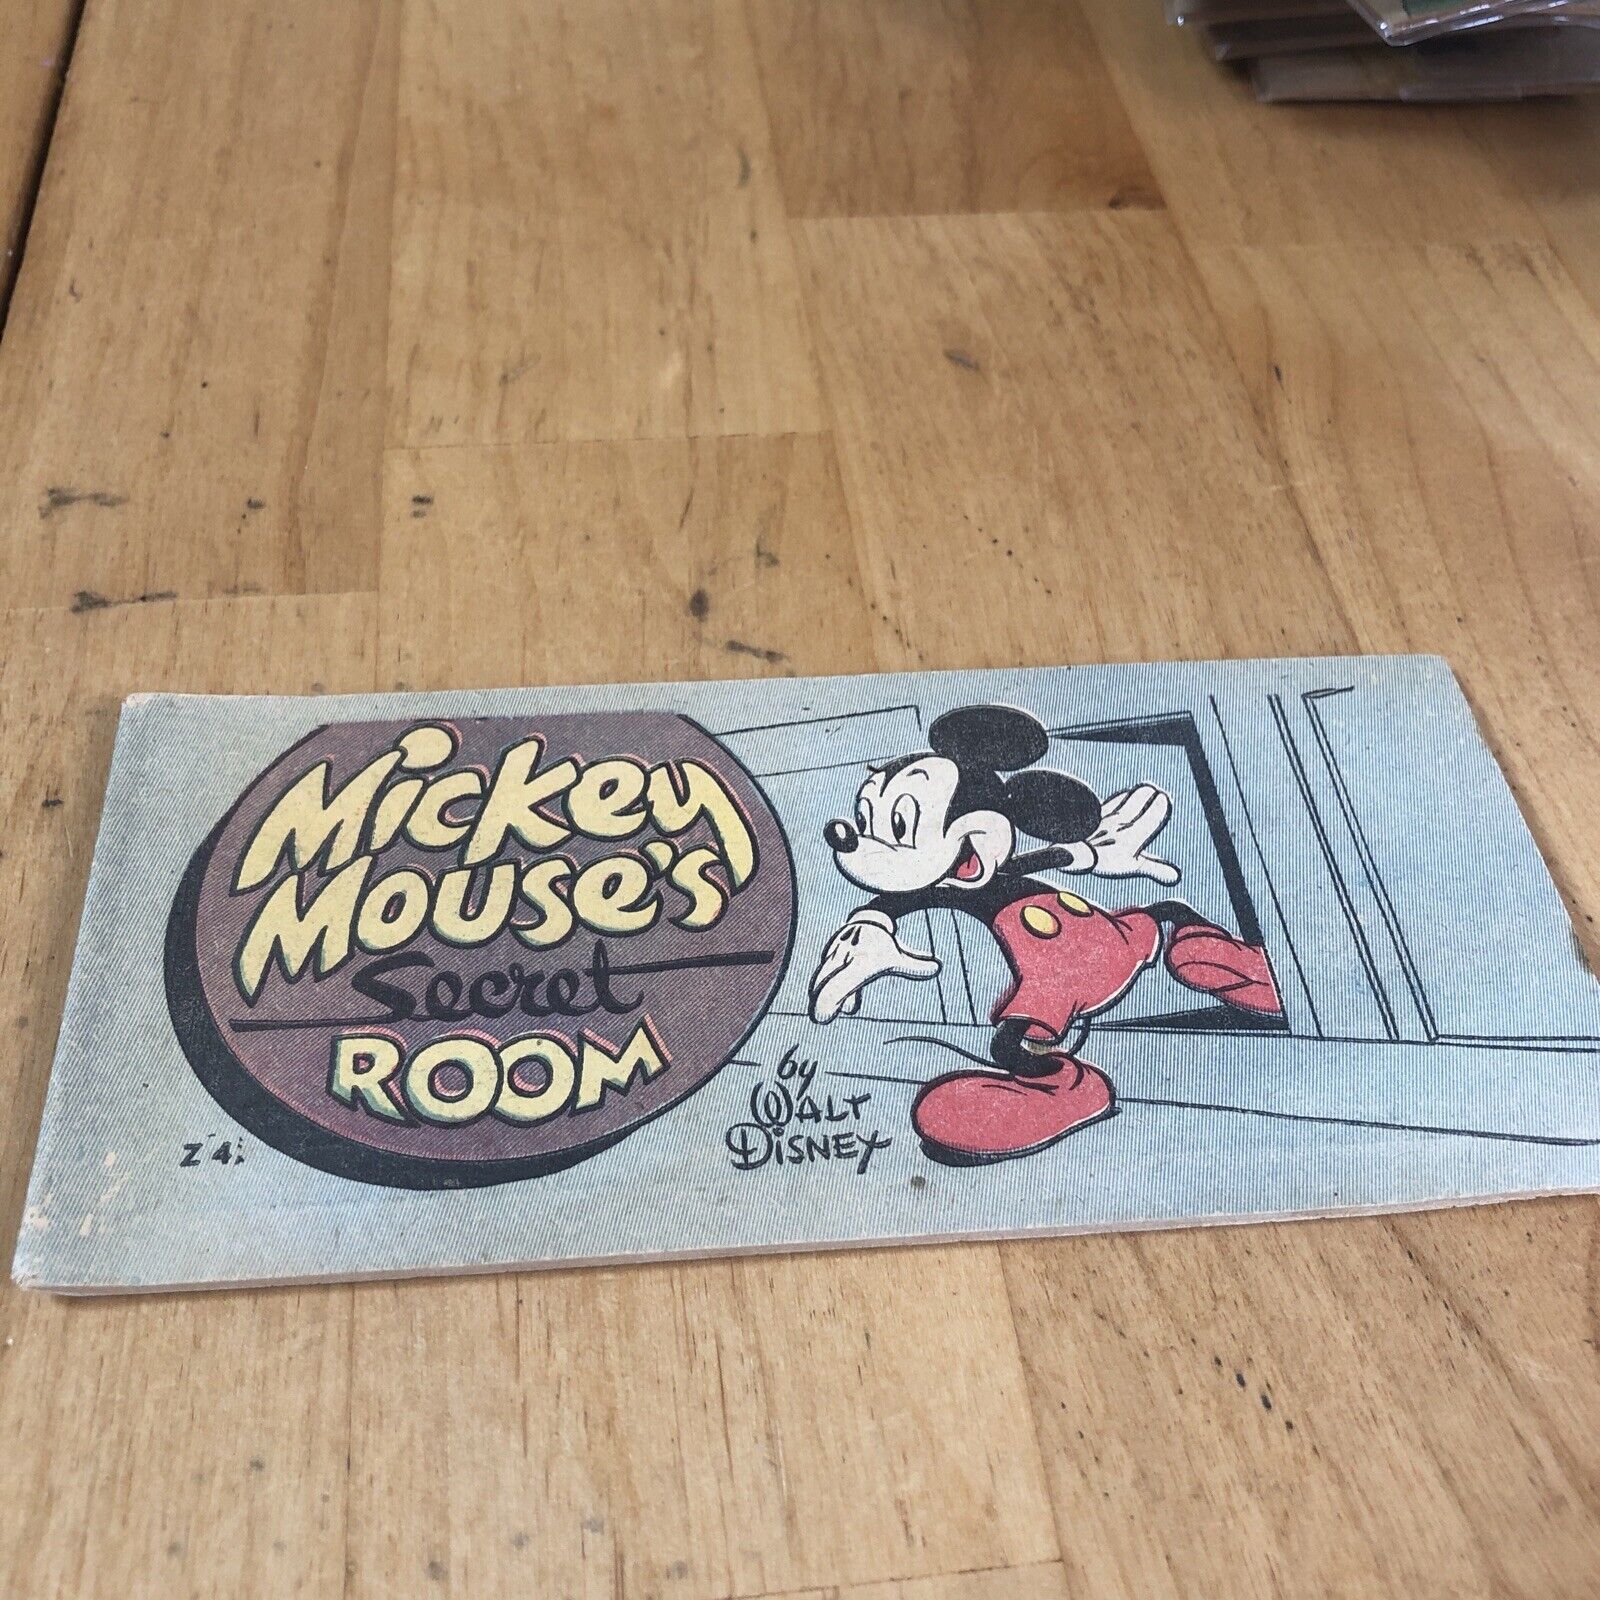 CHEERIOS 1947 CEREAL PREMIUM MINI GIVEAWAY PROMO Z-4 Mickey Mouse’s Secret Room